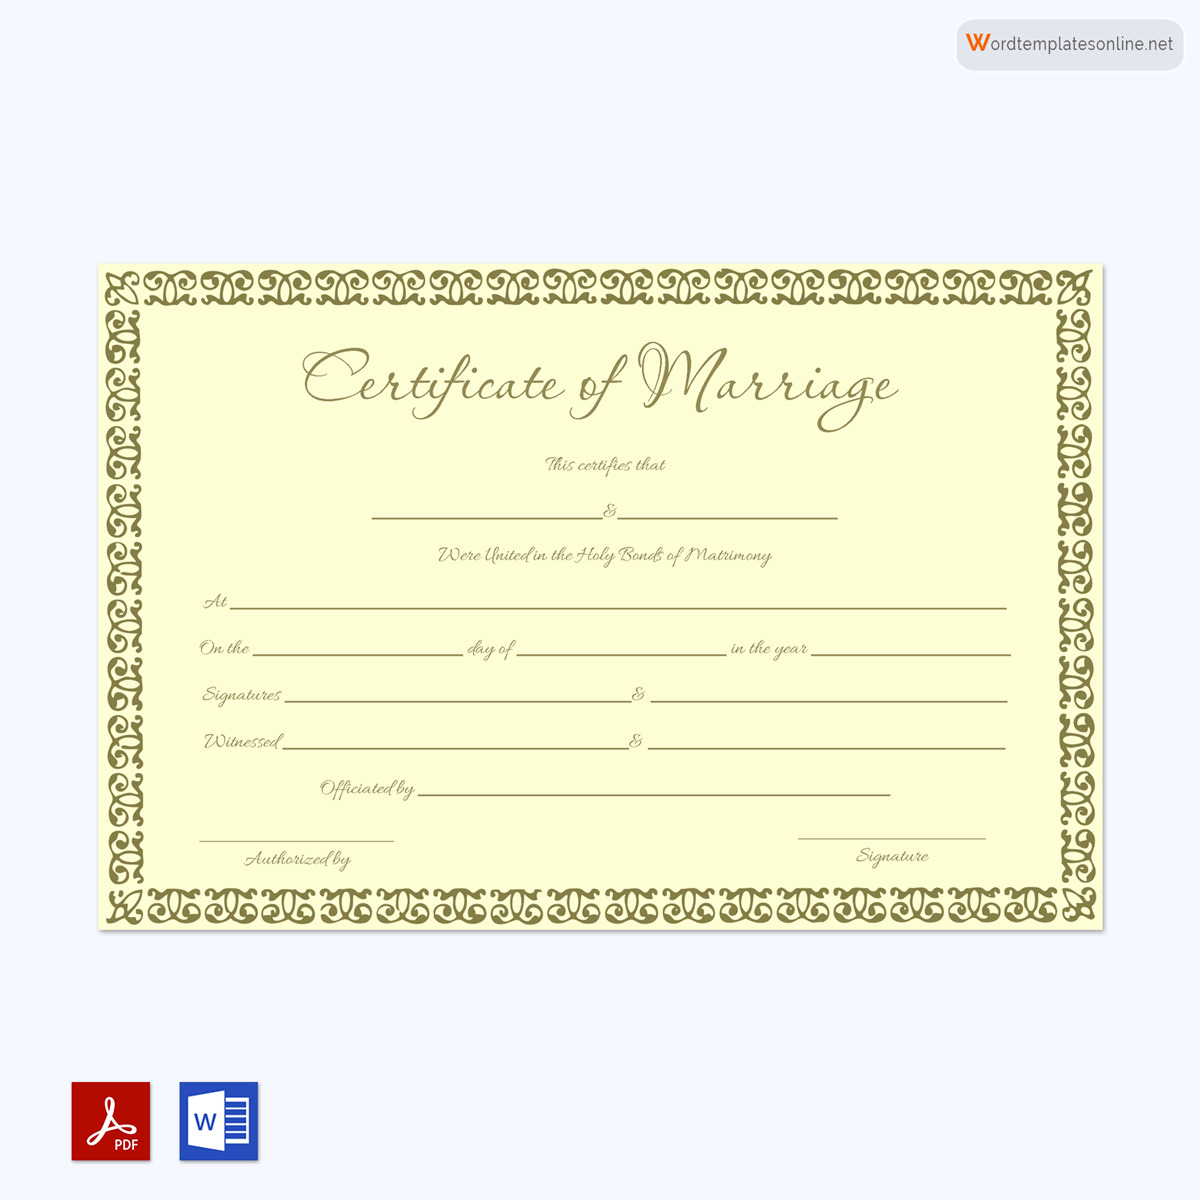 Official Marriage Certificate Example